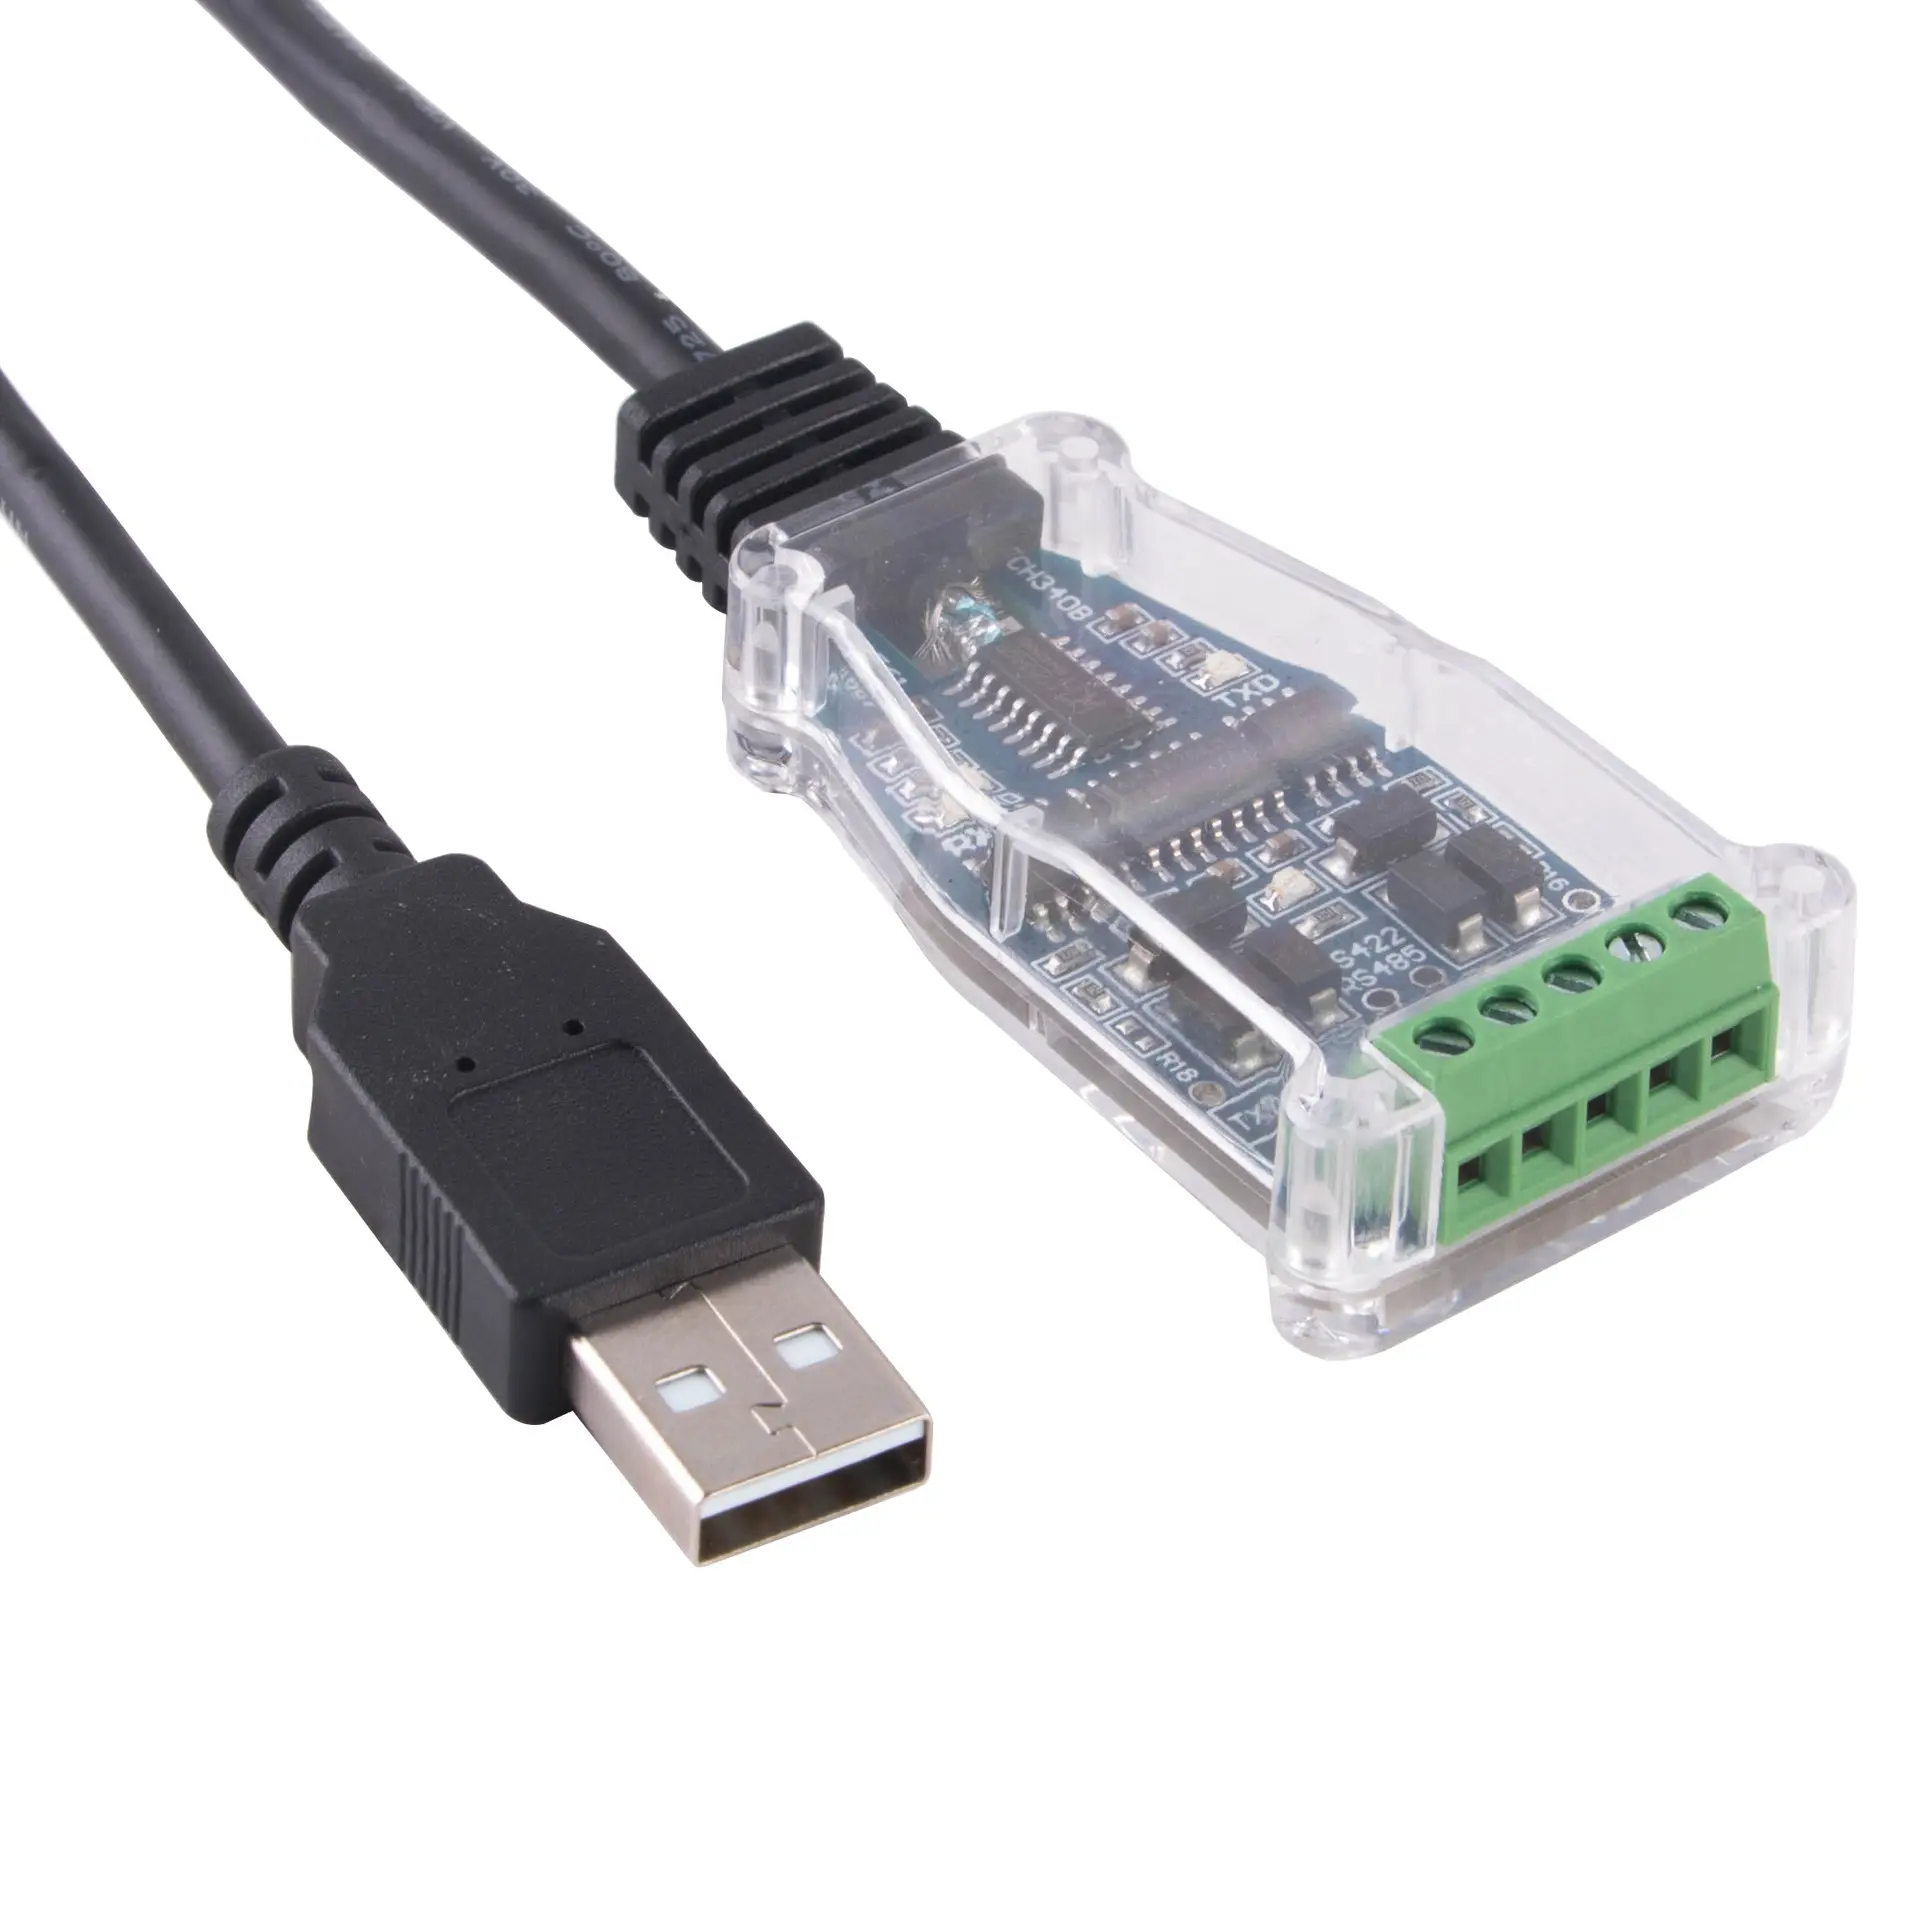 USB to RS422 RS485 Serial Port Converter Adapter Cable With CH340 Chipset